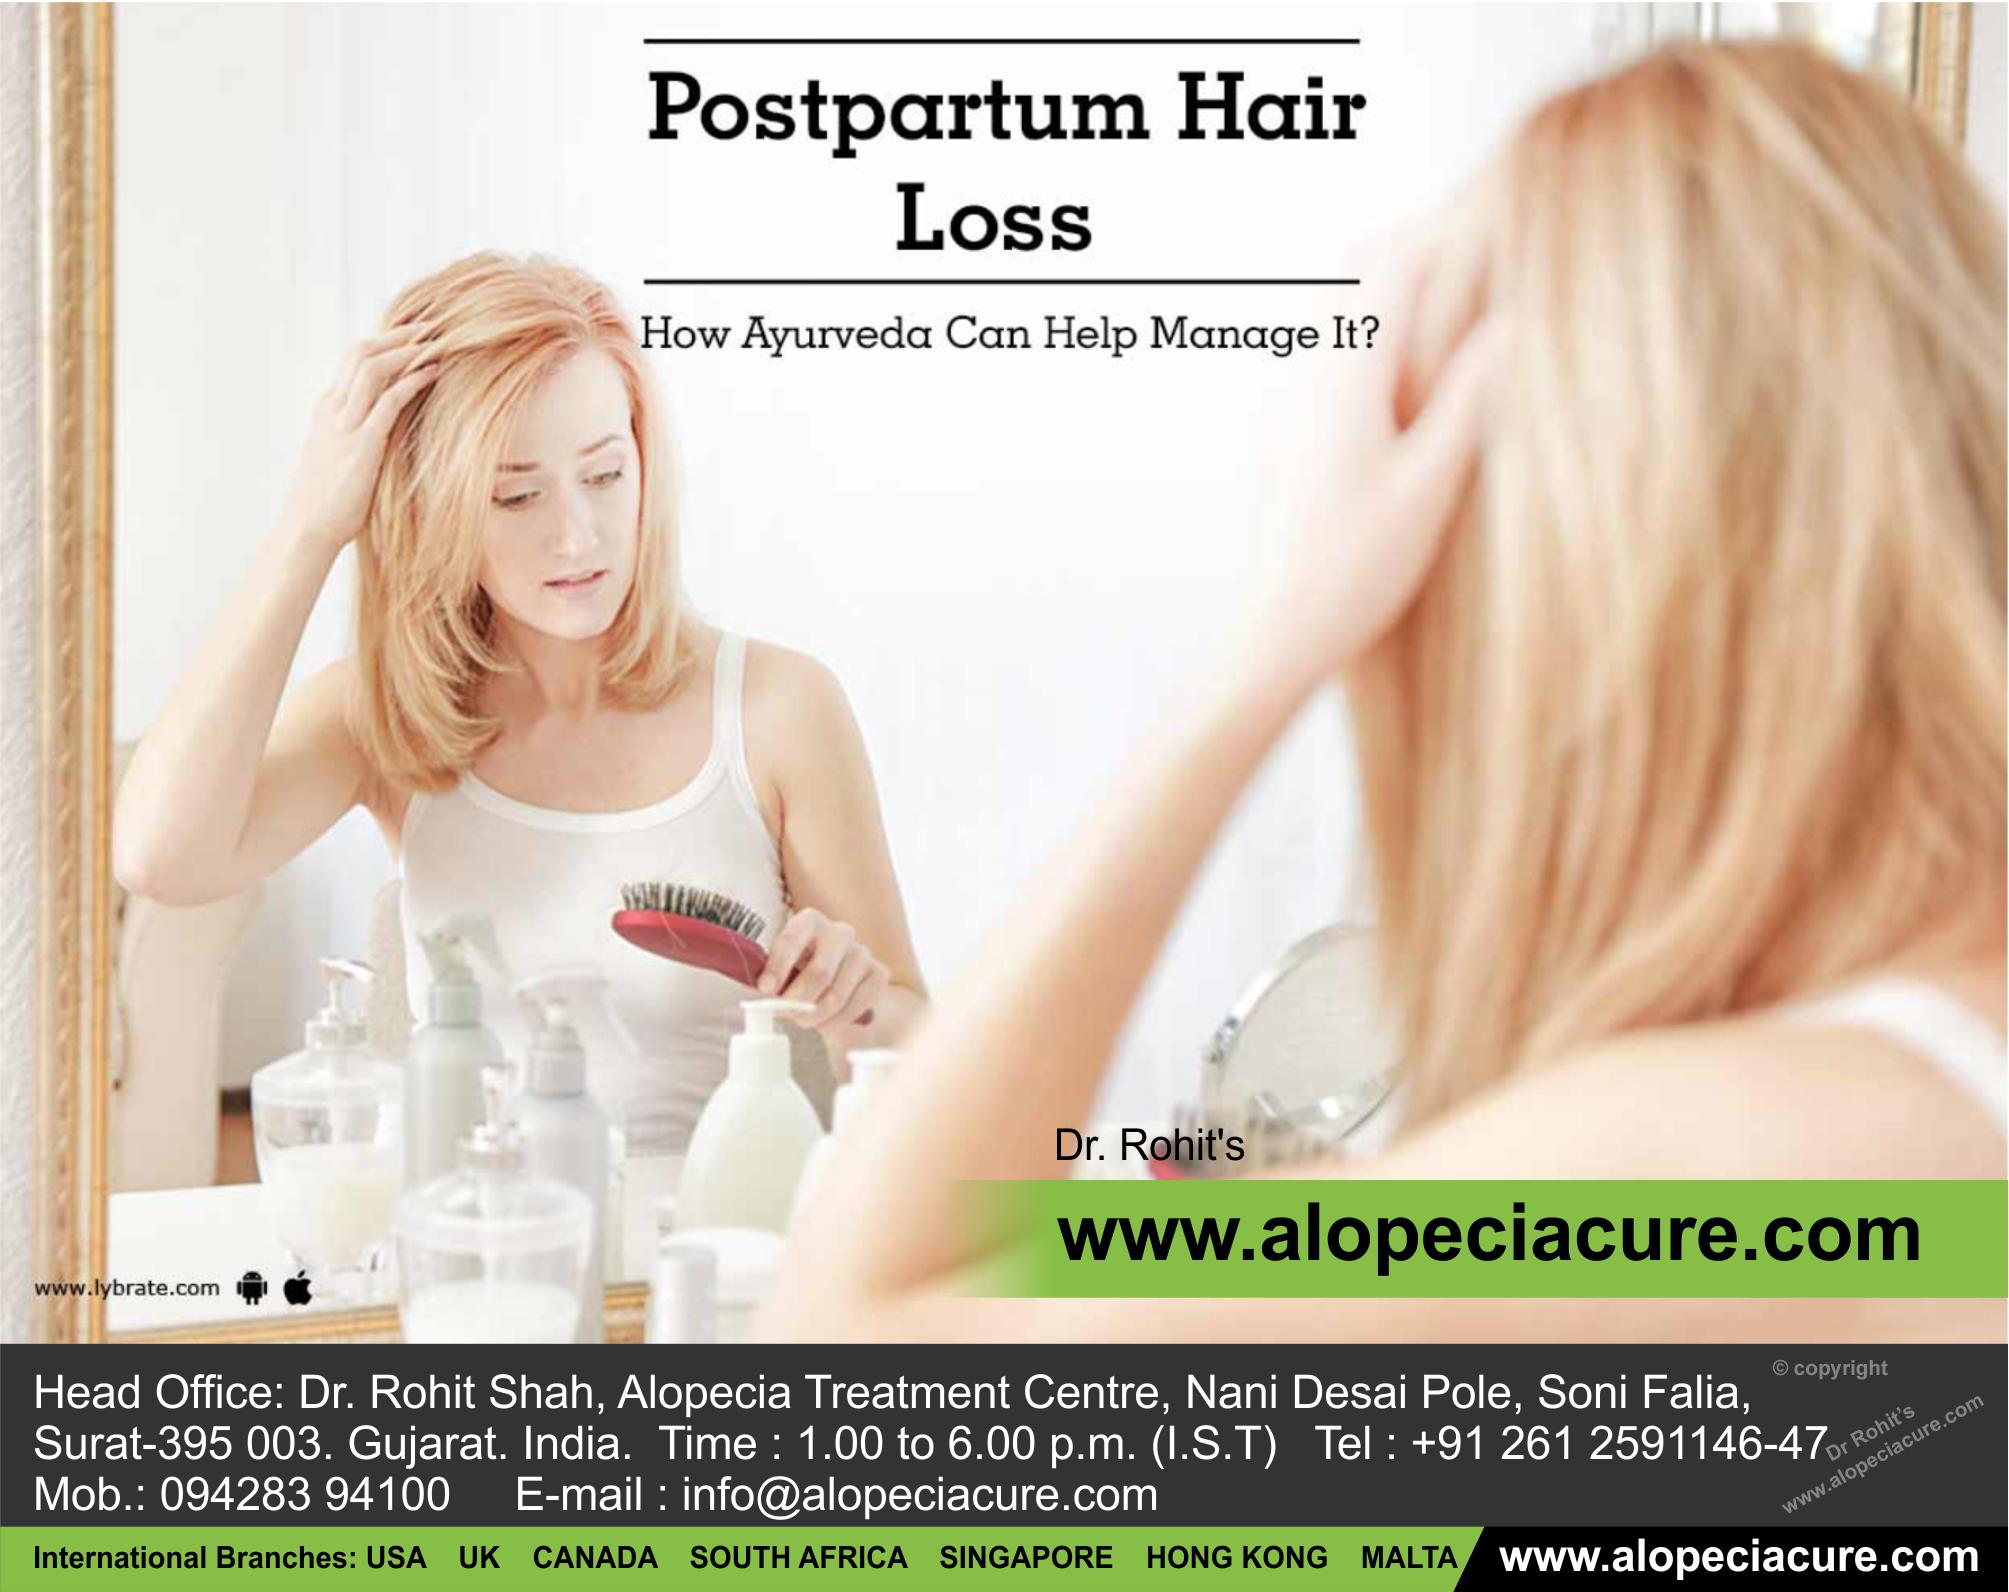 How to manage Postpartum (after pregnancy) Hair Loss?